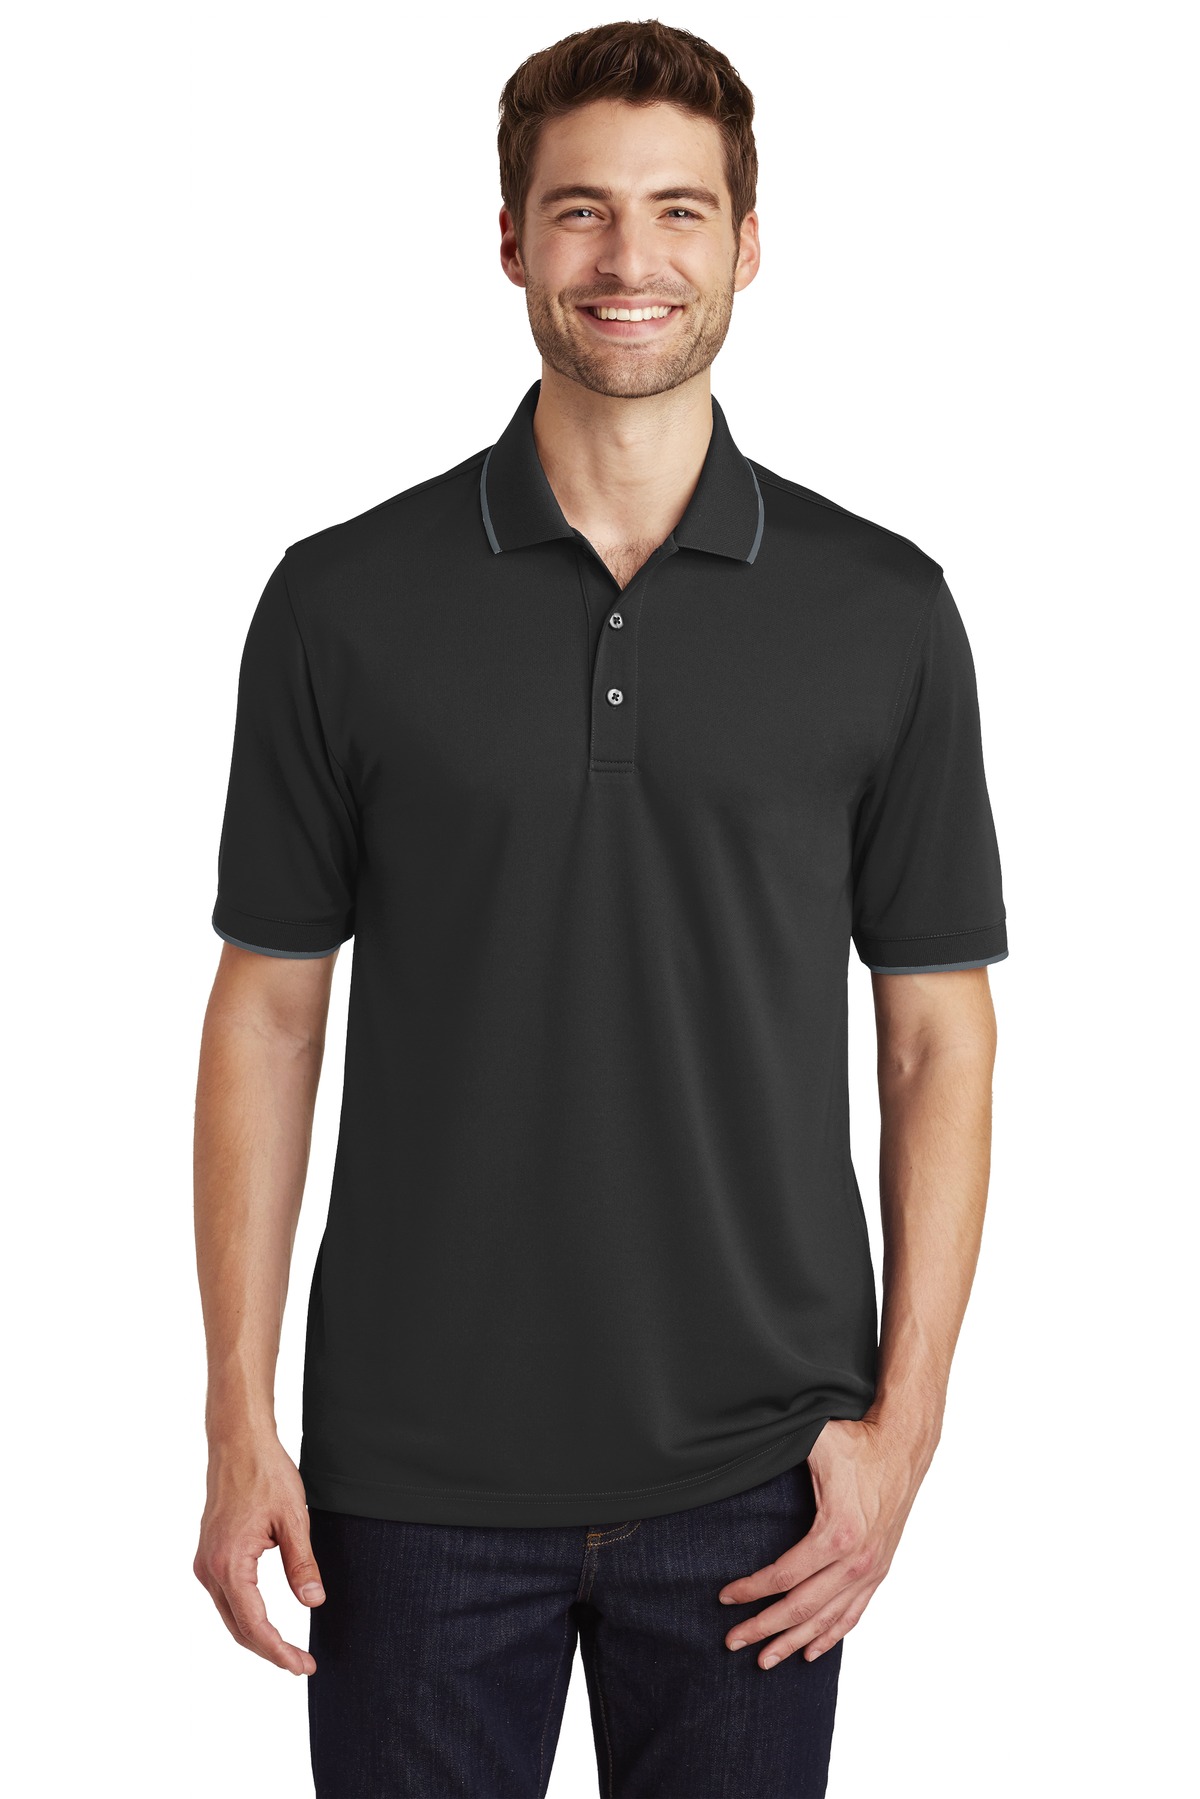 Port Authority Dry Zone UV Micro-Mesh Tipped Polo....